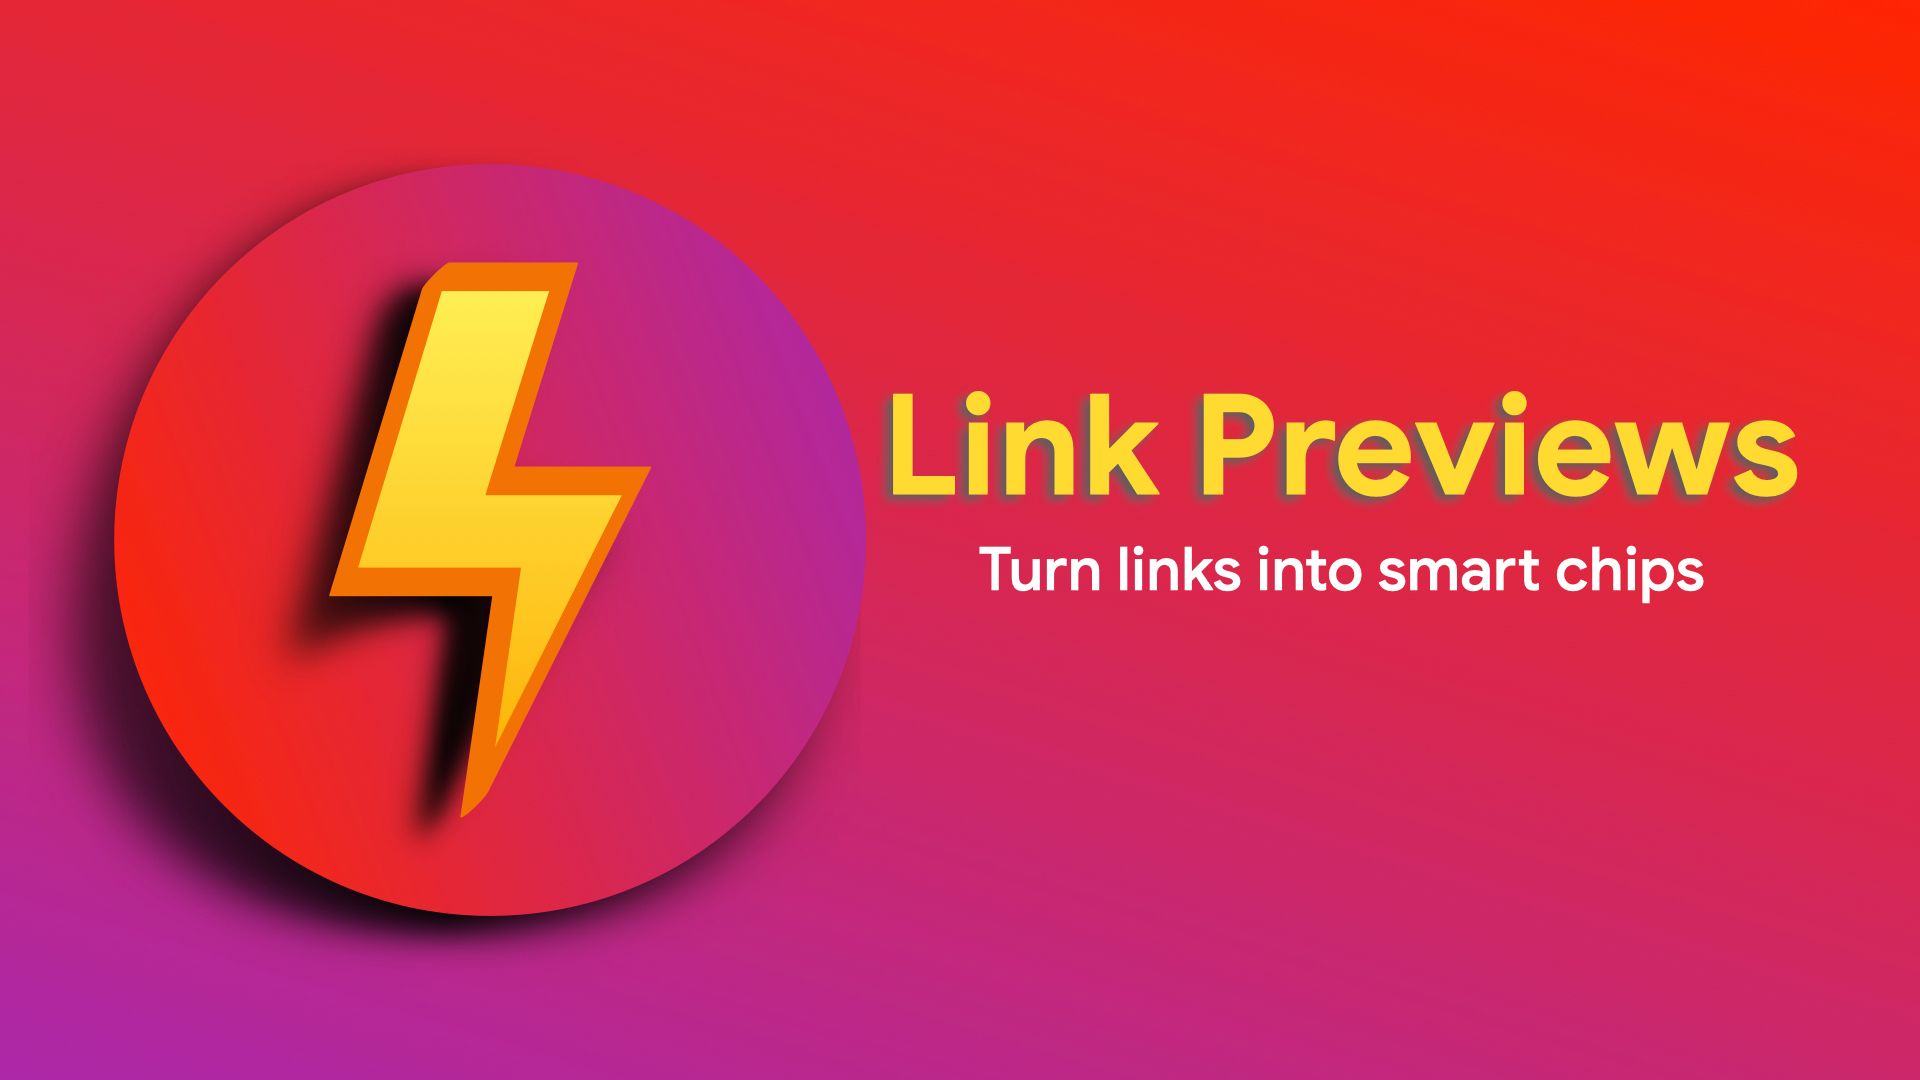 Link Previews — Turn links into smart chips